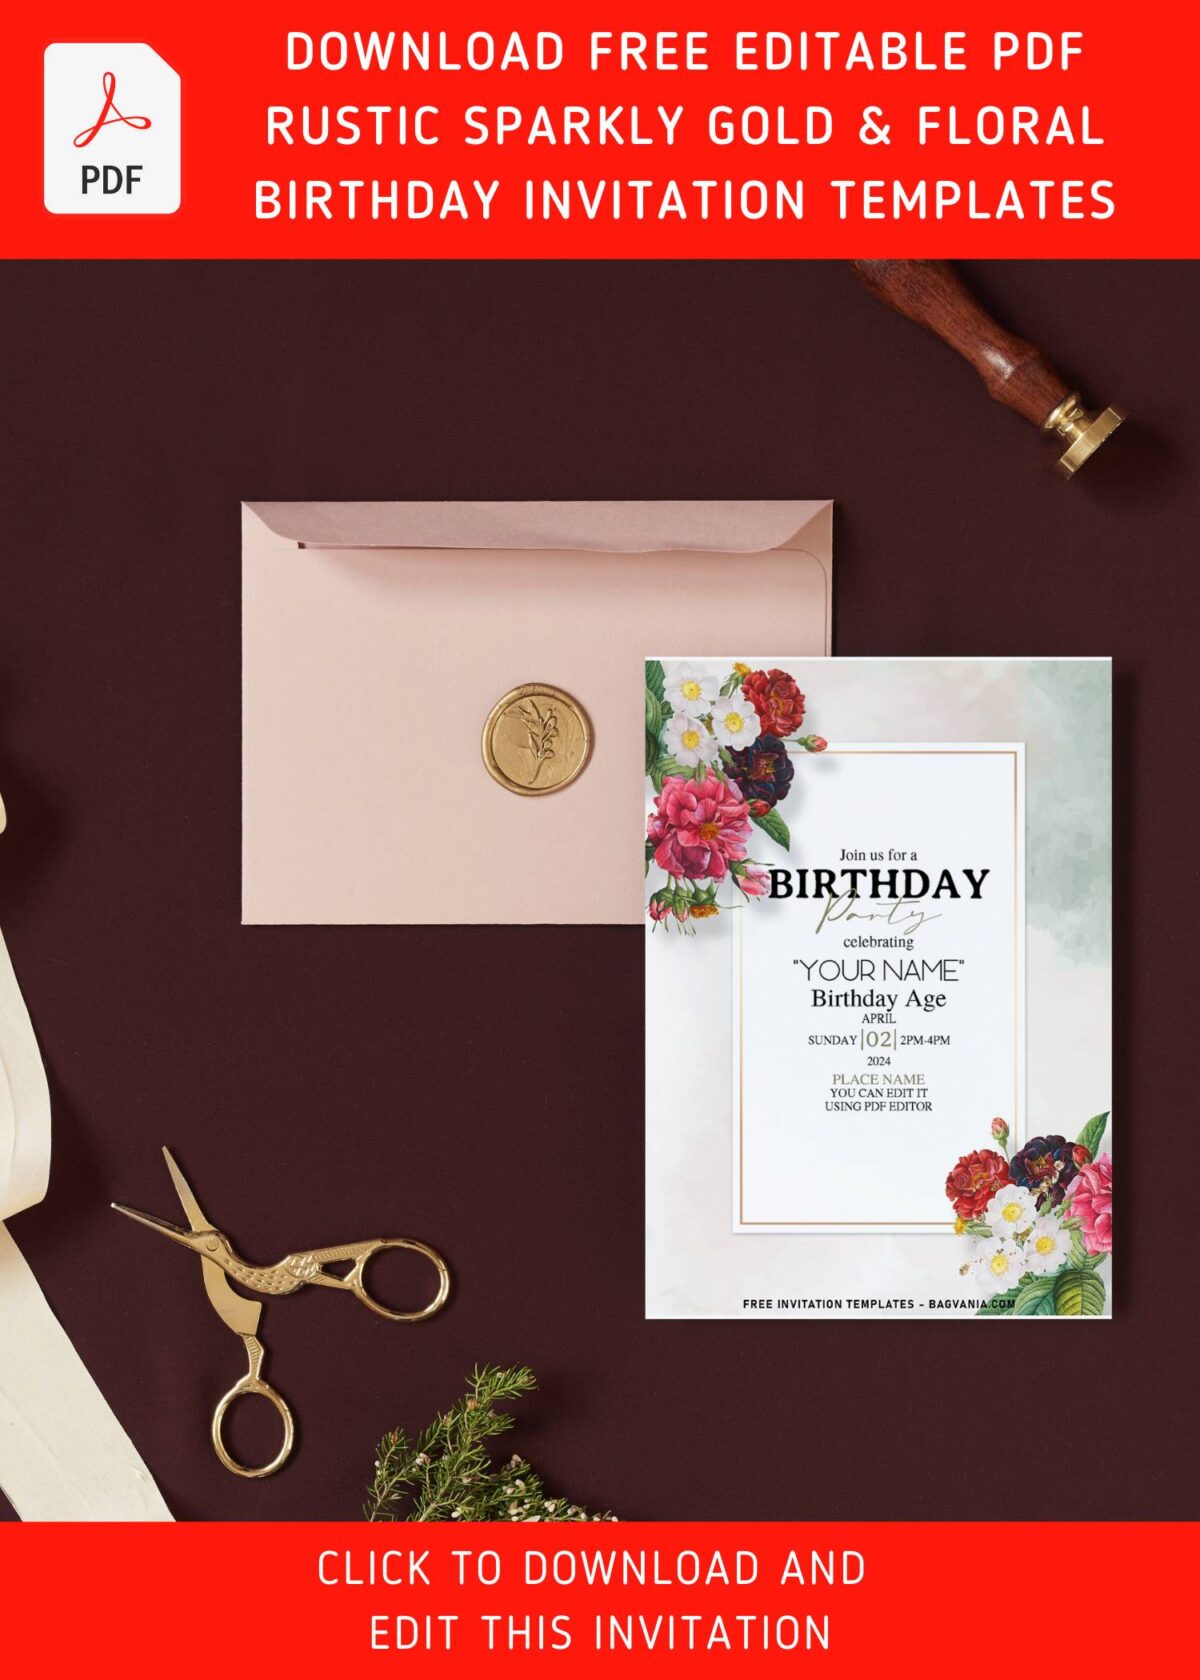 (Free Editable PDF) Dusty Bright And Moody Garden Rose Birthday Invitation Templates with moody floral decorations